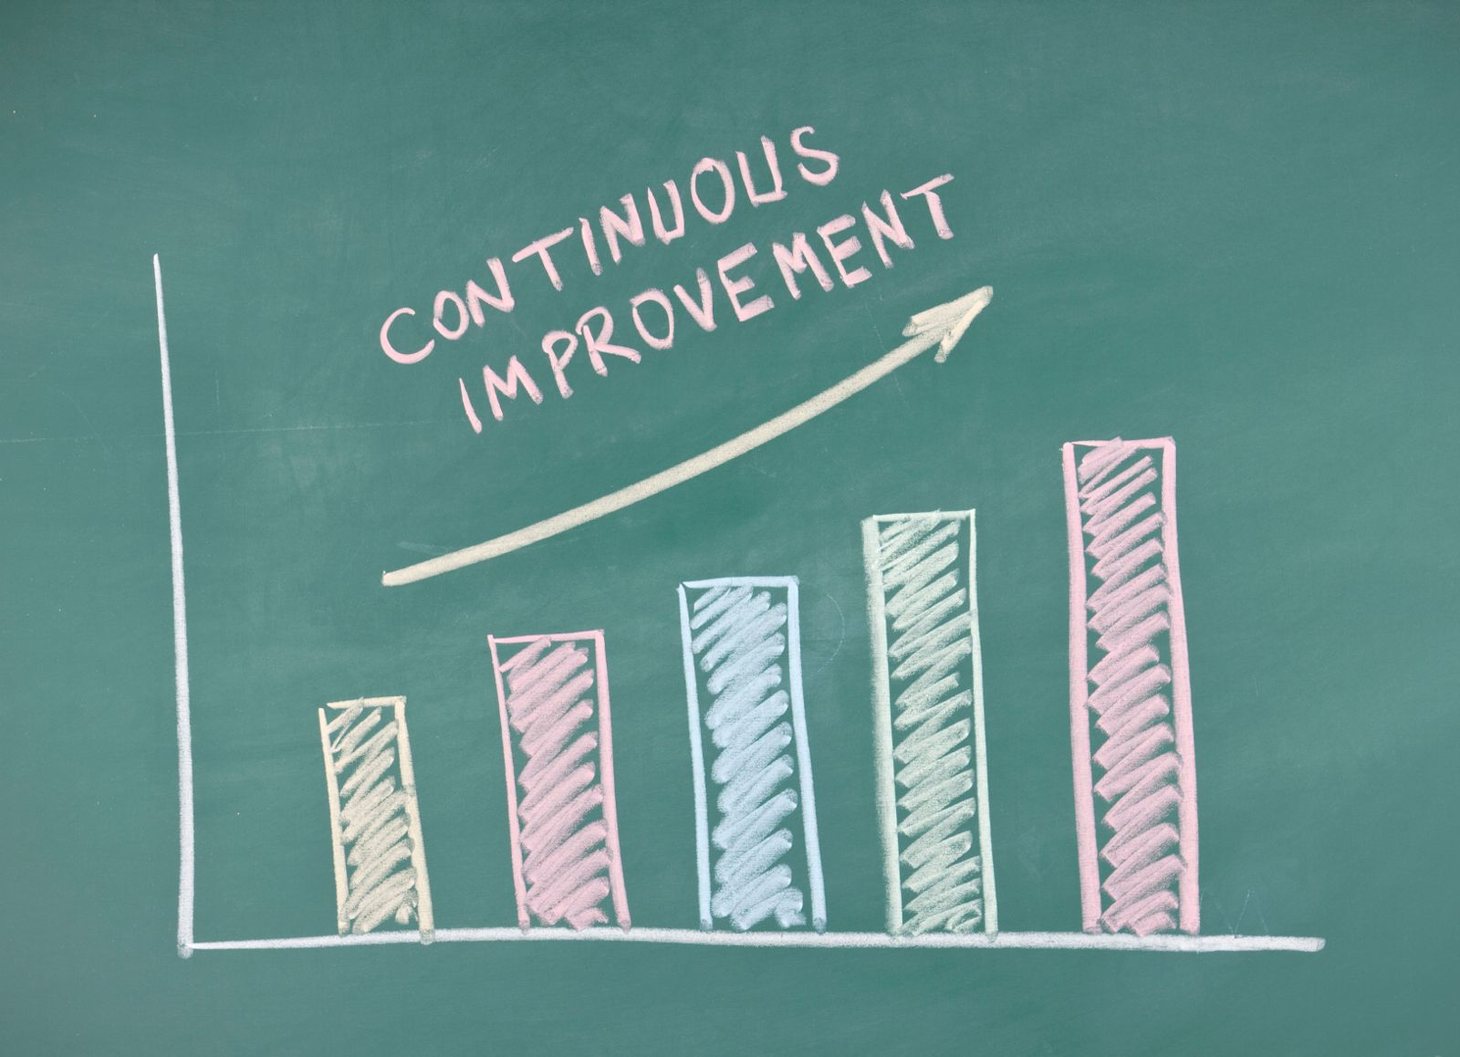 On Continuous Improvement